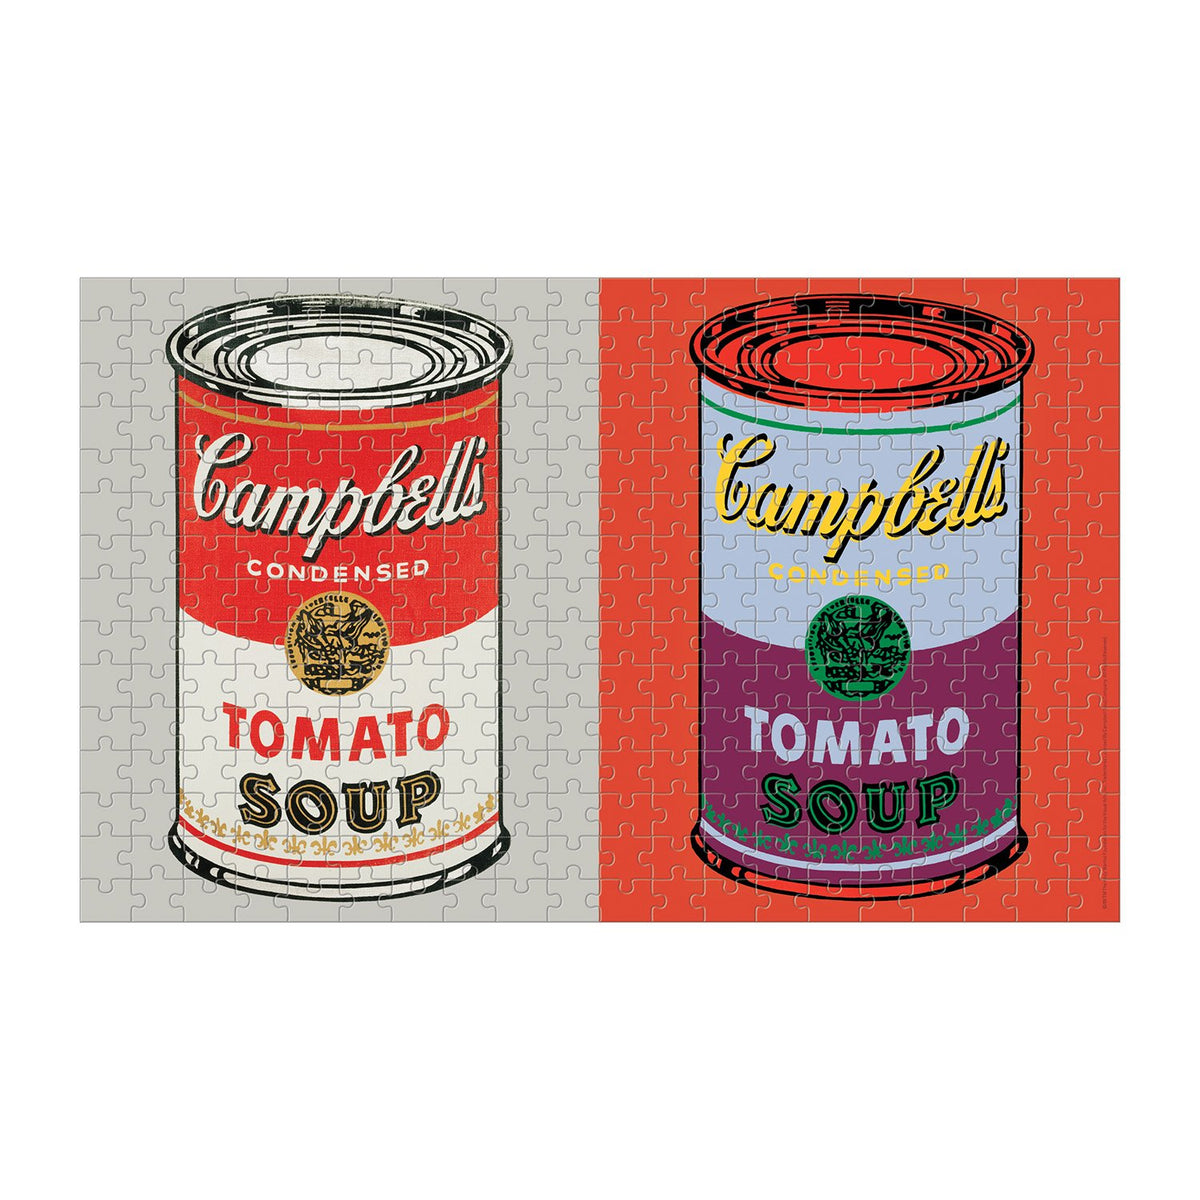 Andy Warhol Soup Cans 300 Piece Lenticular Puzzle 300 Piece Lenticular Puzzles Andy Warhol Collection 